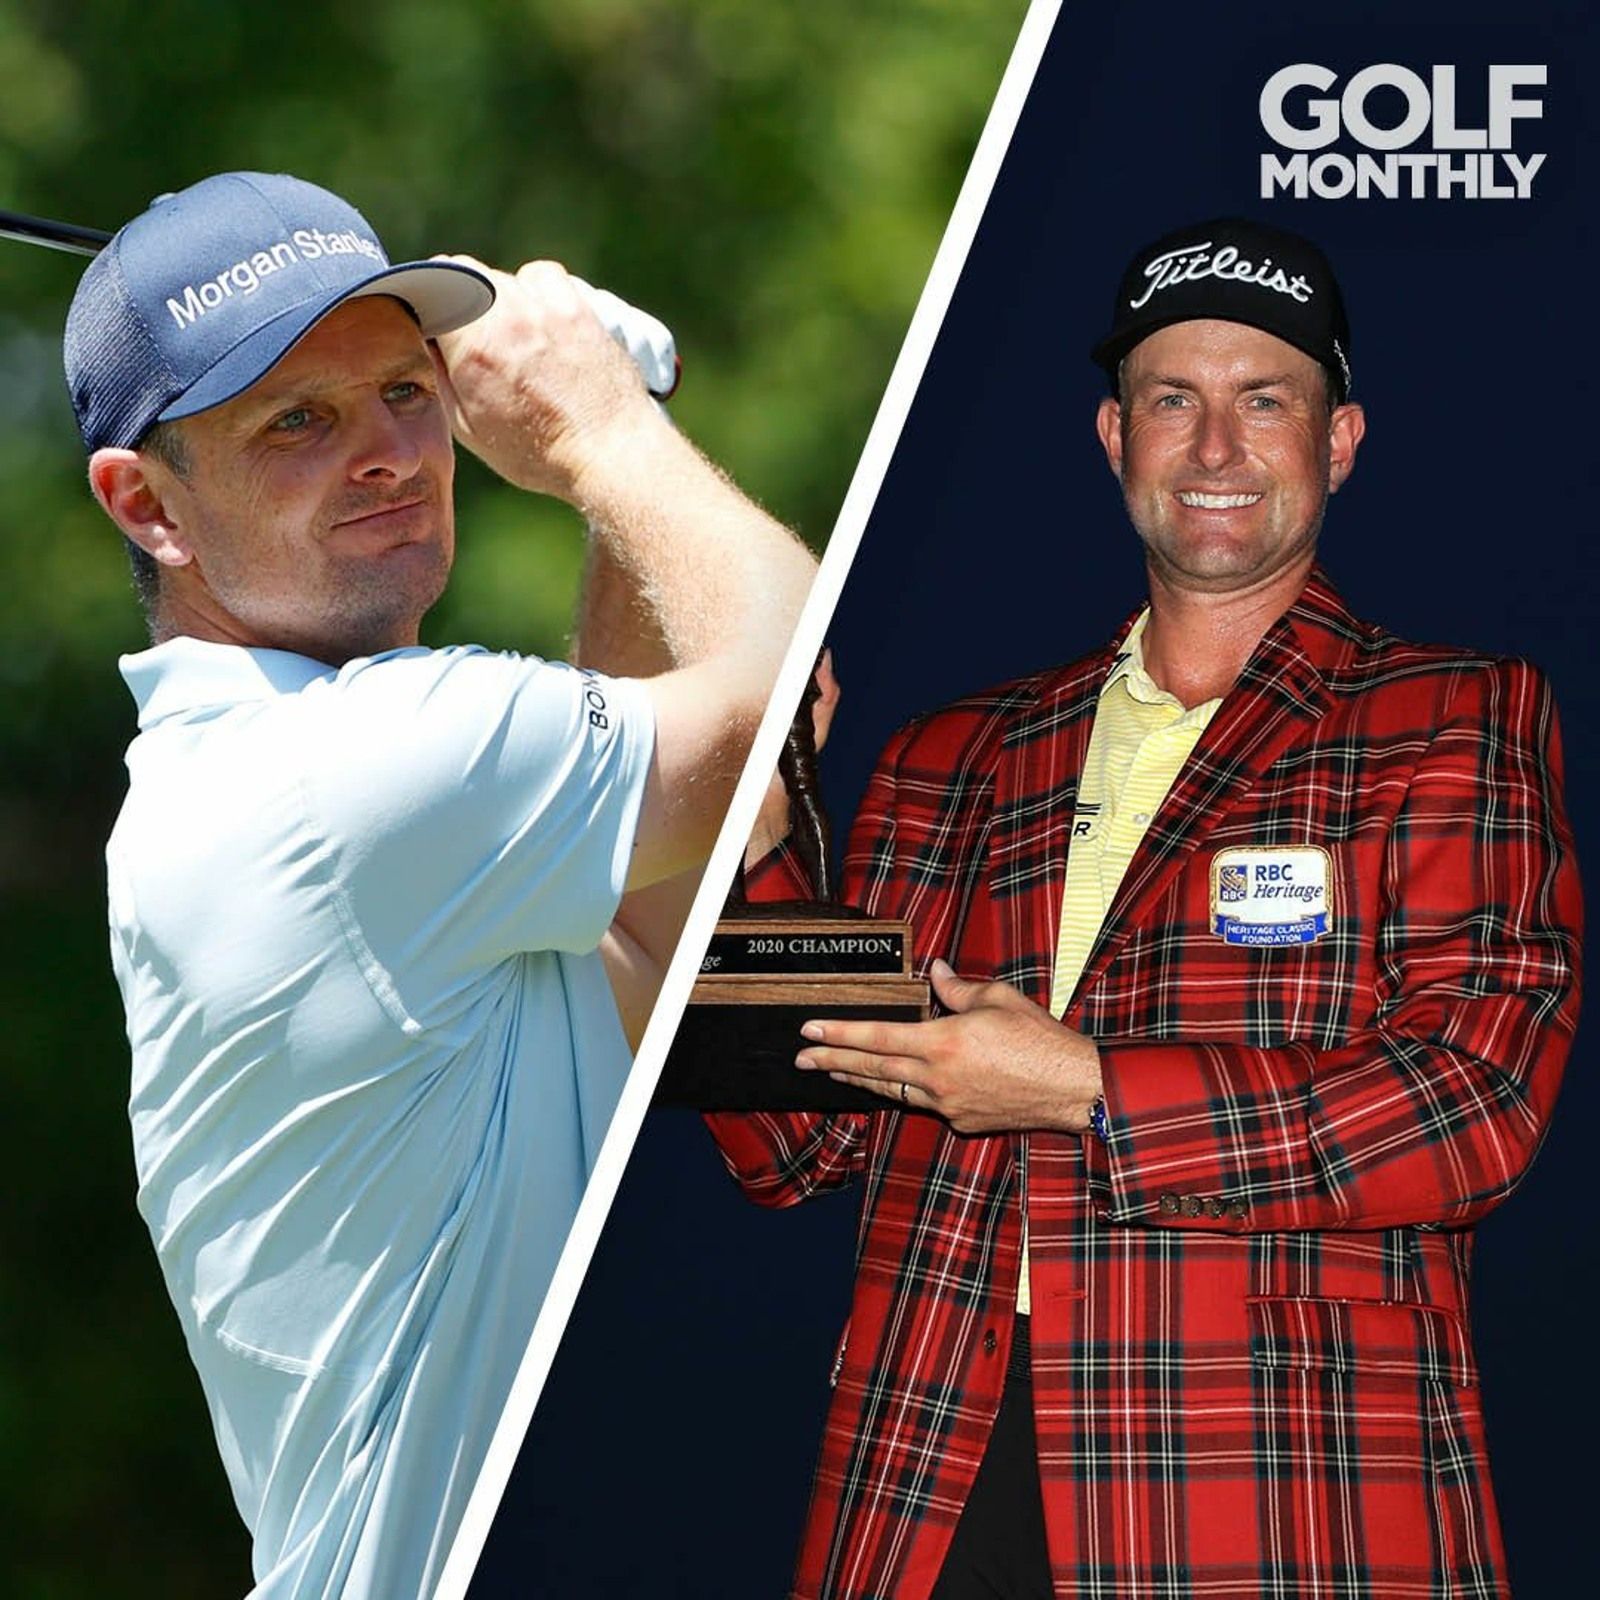 Justin Rose exclusive + Is Simpson golf’s most underrated player?